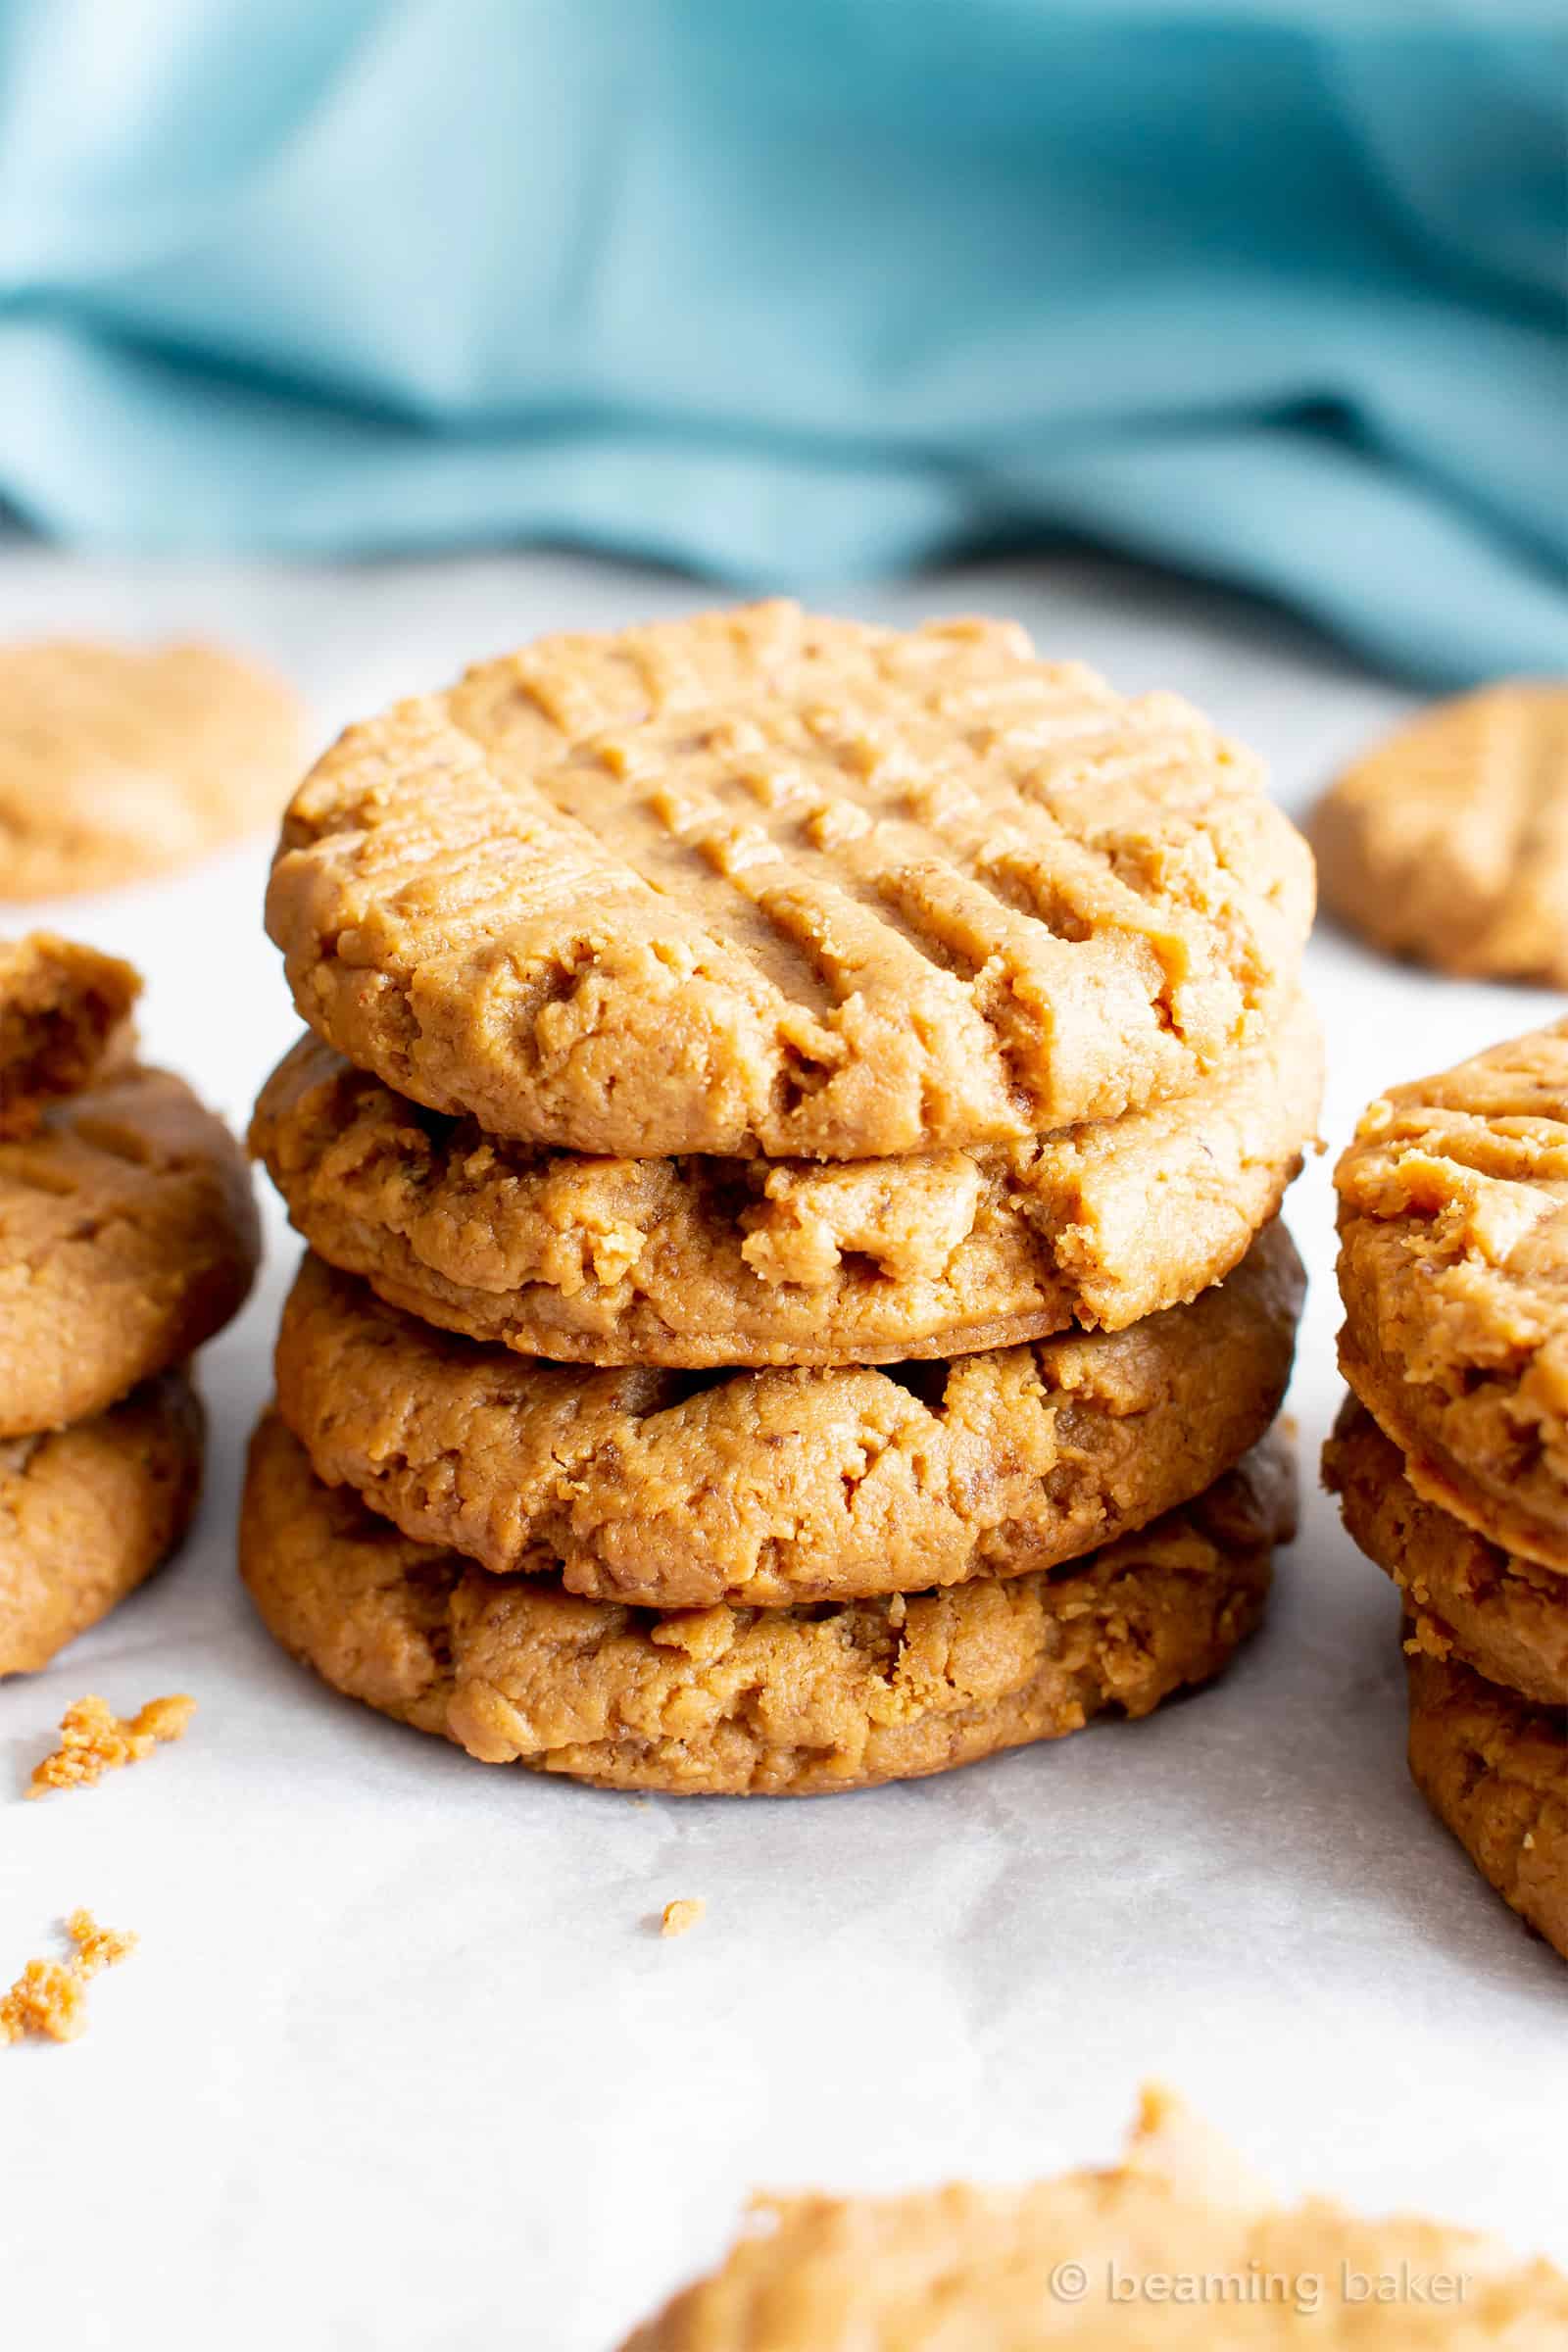 4 Ingredient Gluten Free Soft Peanut Butter Cookies (V, GF): an easy recipe for deliciously super-soft, flourless peanut butter cookies made with just a few healthy ingredients. #PeanutButter #Vegan #GlutenFree #GlutenFreeVegan #VeganBaking #GlutenFreeCookies | Recipe at BeamingBaker.com